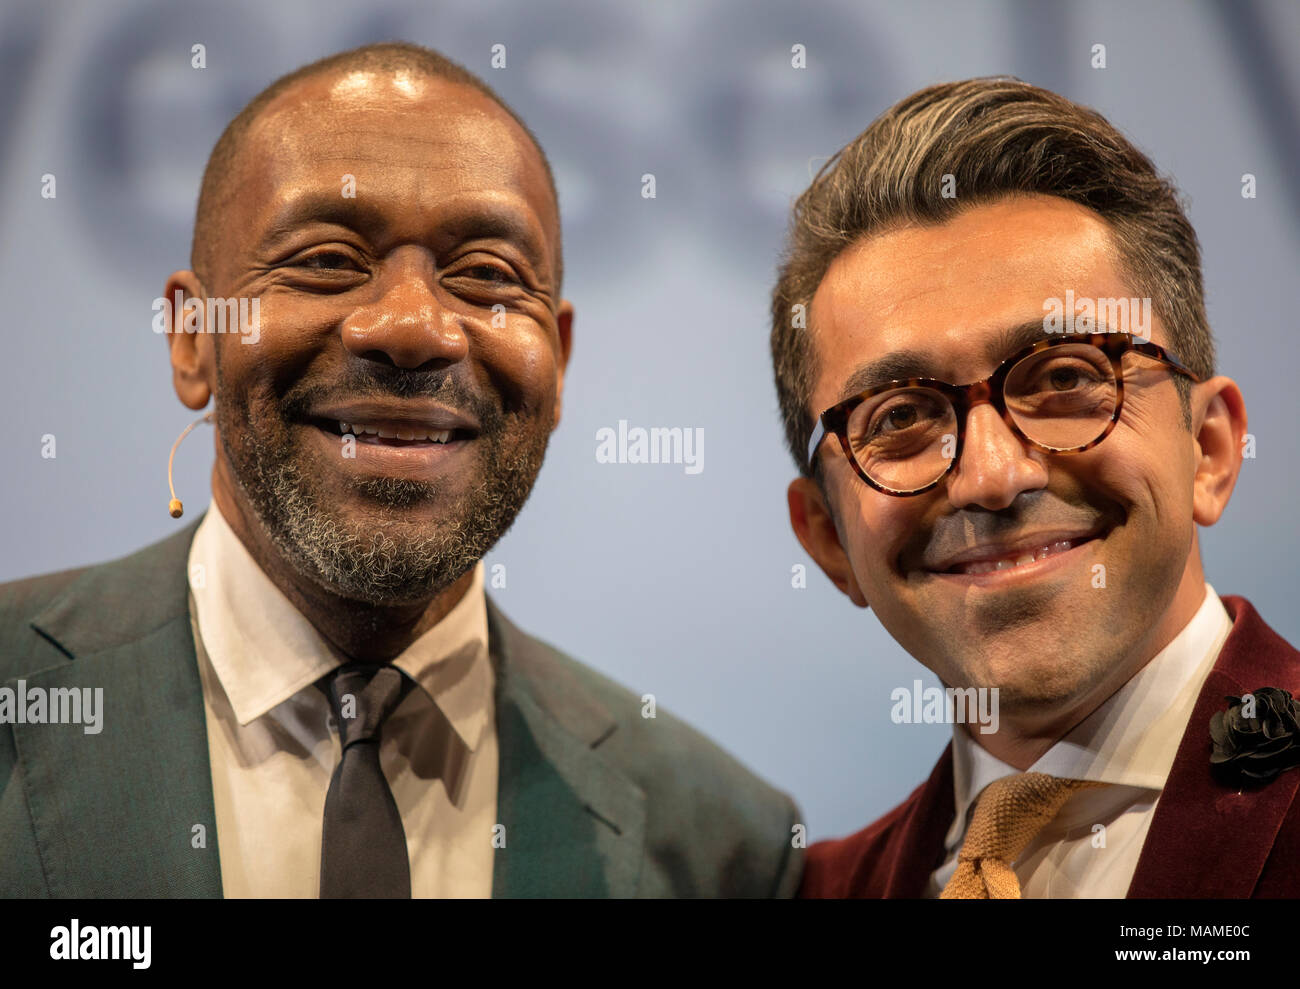 British comedian, writer and actor Sir Lenny Henry calls for tax breaks to increase diversity in TV. MIPCOM Oct. 18 2017, Cannes, France Stock Photo